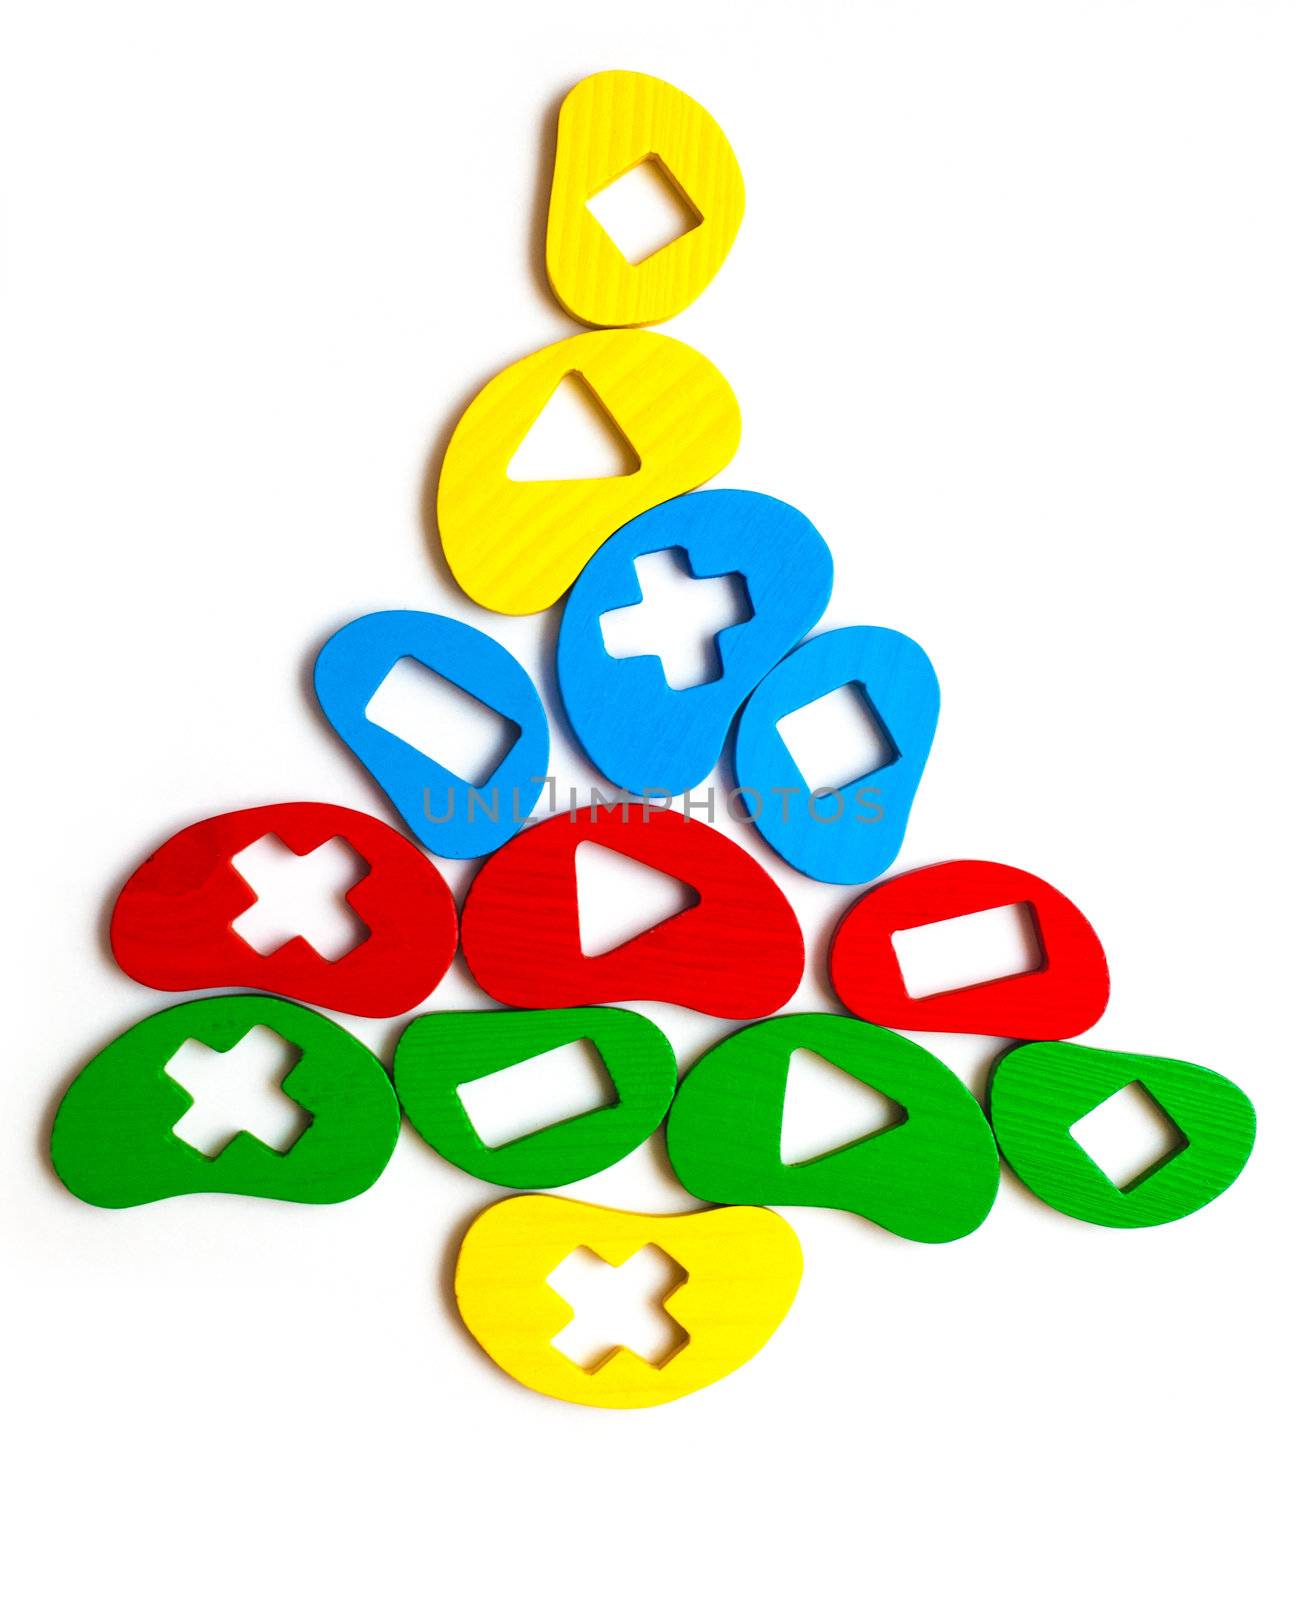 Christmas tree toy of the elements, geometric shapes, bright colors